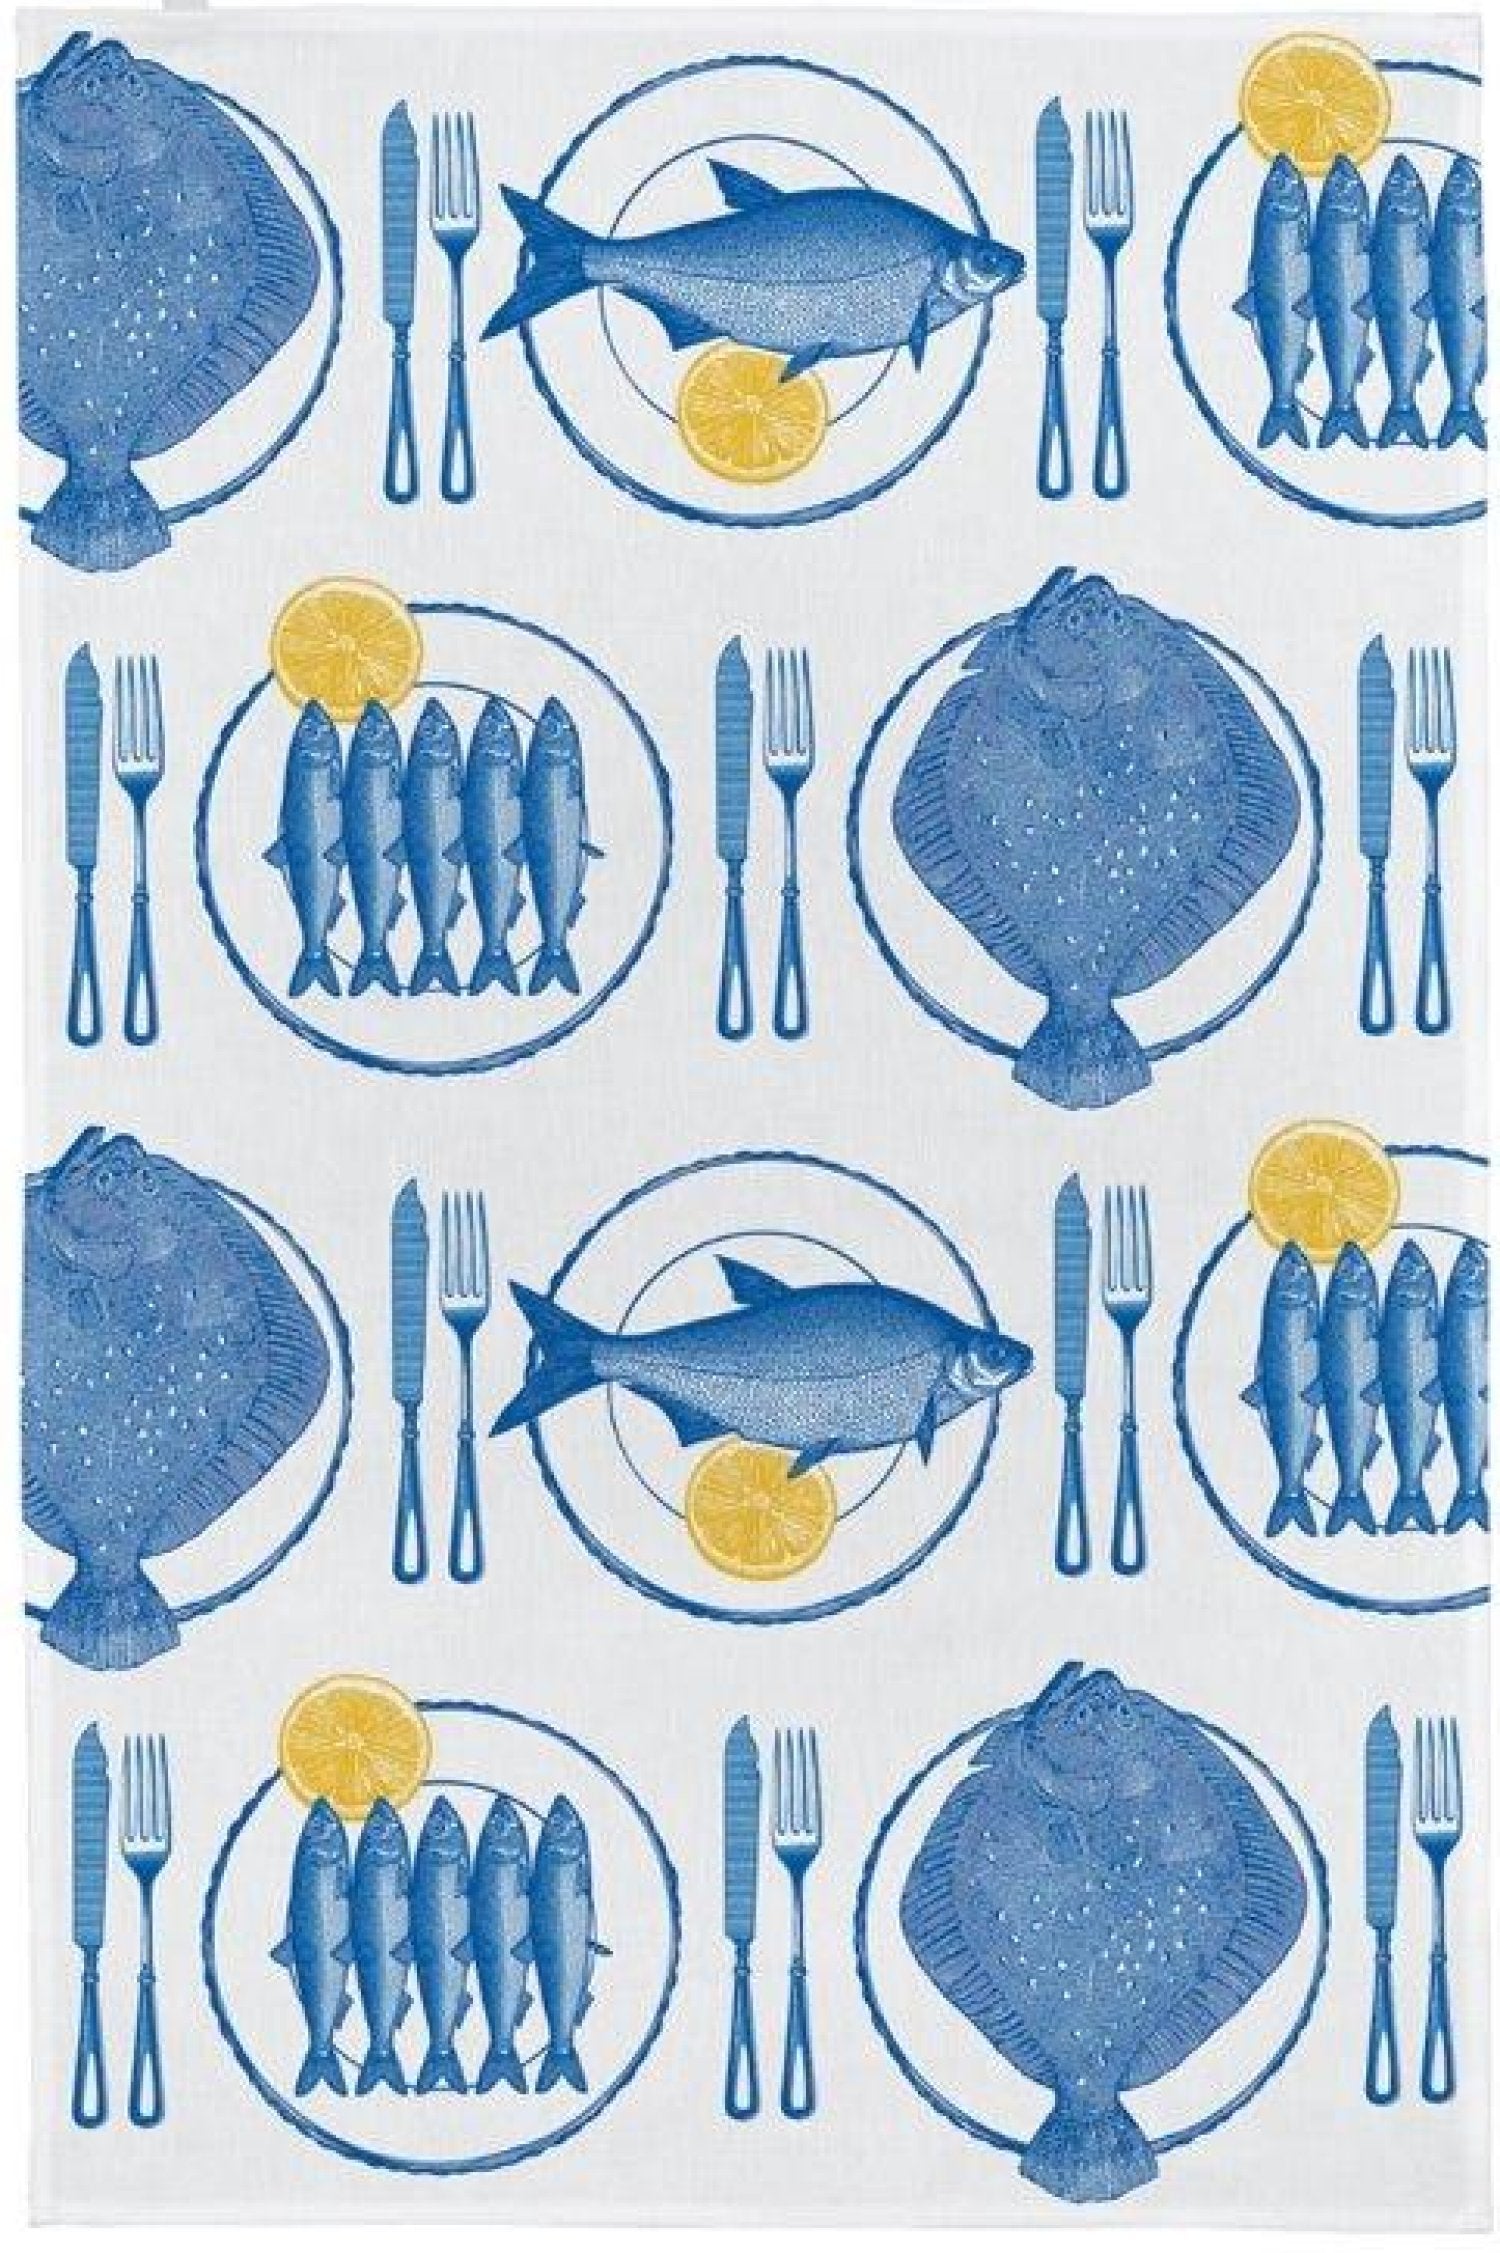 Thornback & Peel "Fish Supper", Pure cotton tea towel. Hand printed in the UK.